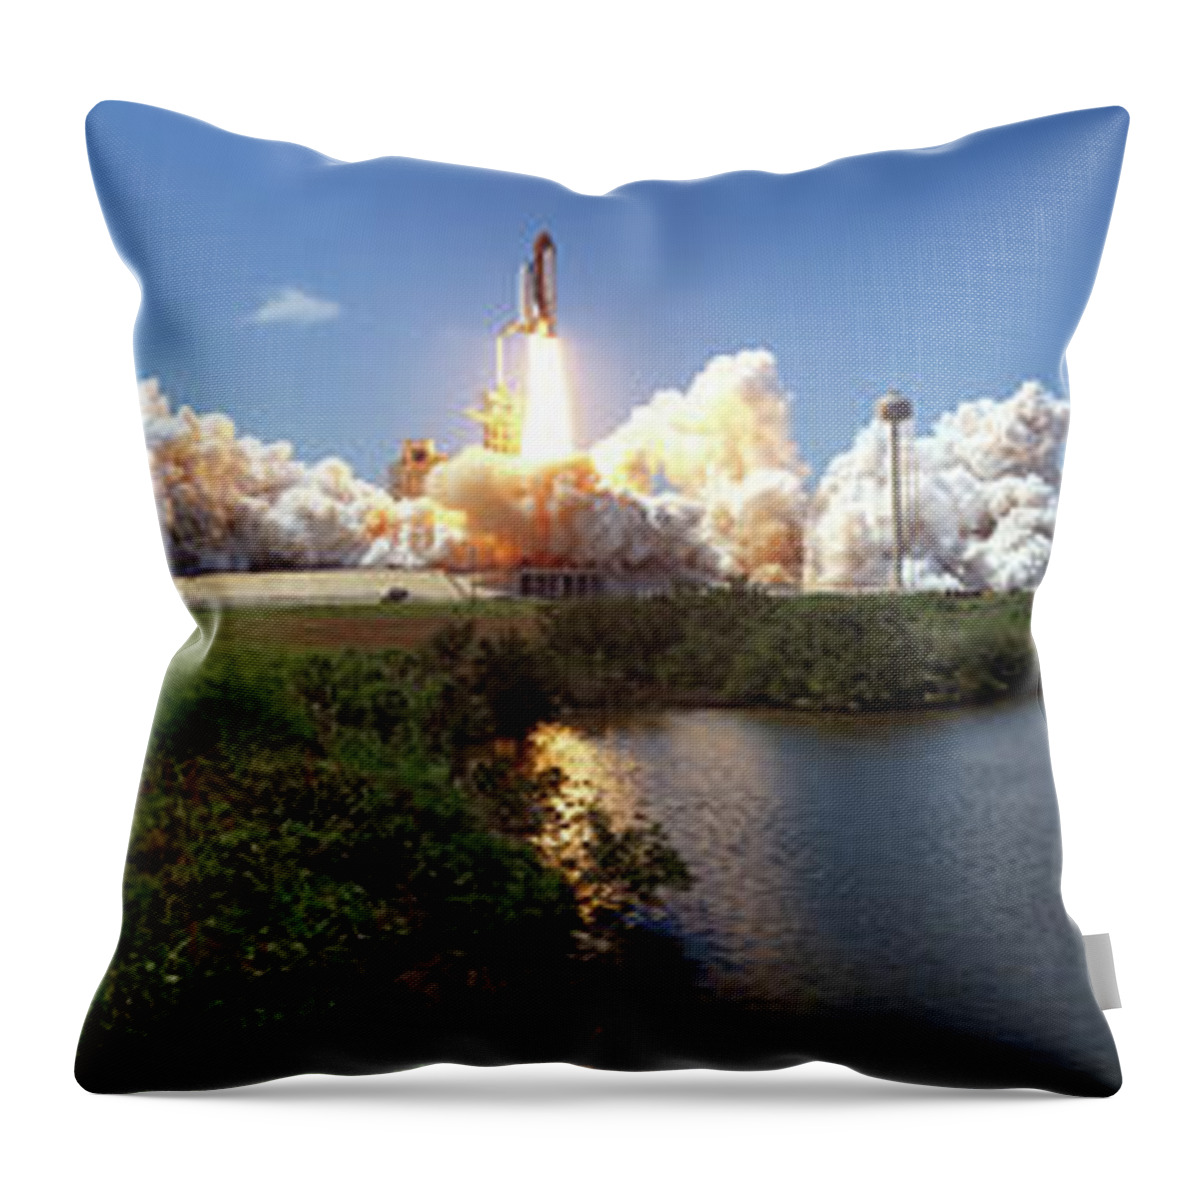 Photography Throw Pillow featuring the photograph Launch, Kennedy Space Center, Florida by Panoramic Images